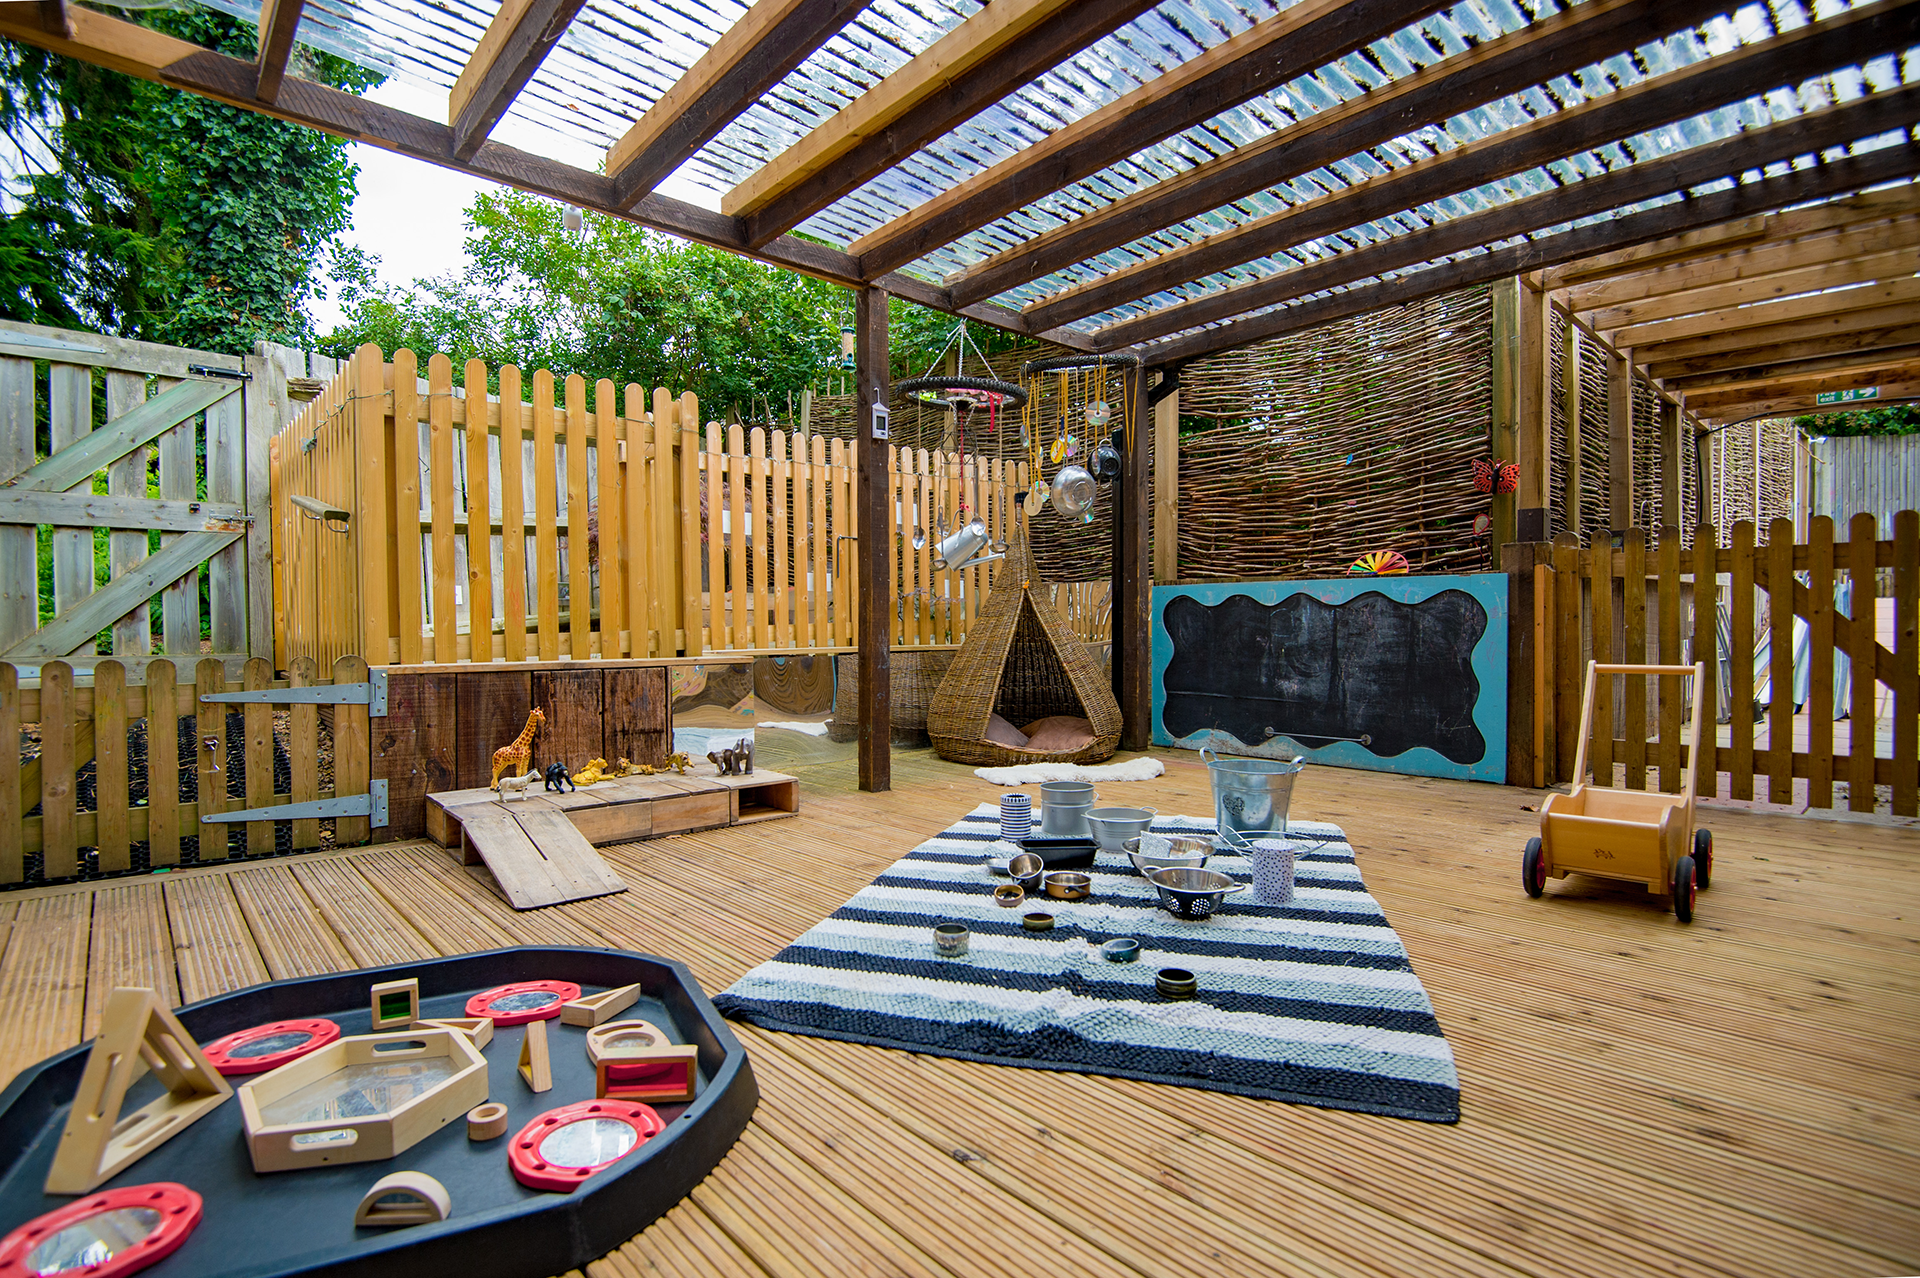 Outdoor area with toys and pans